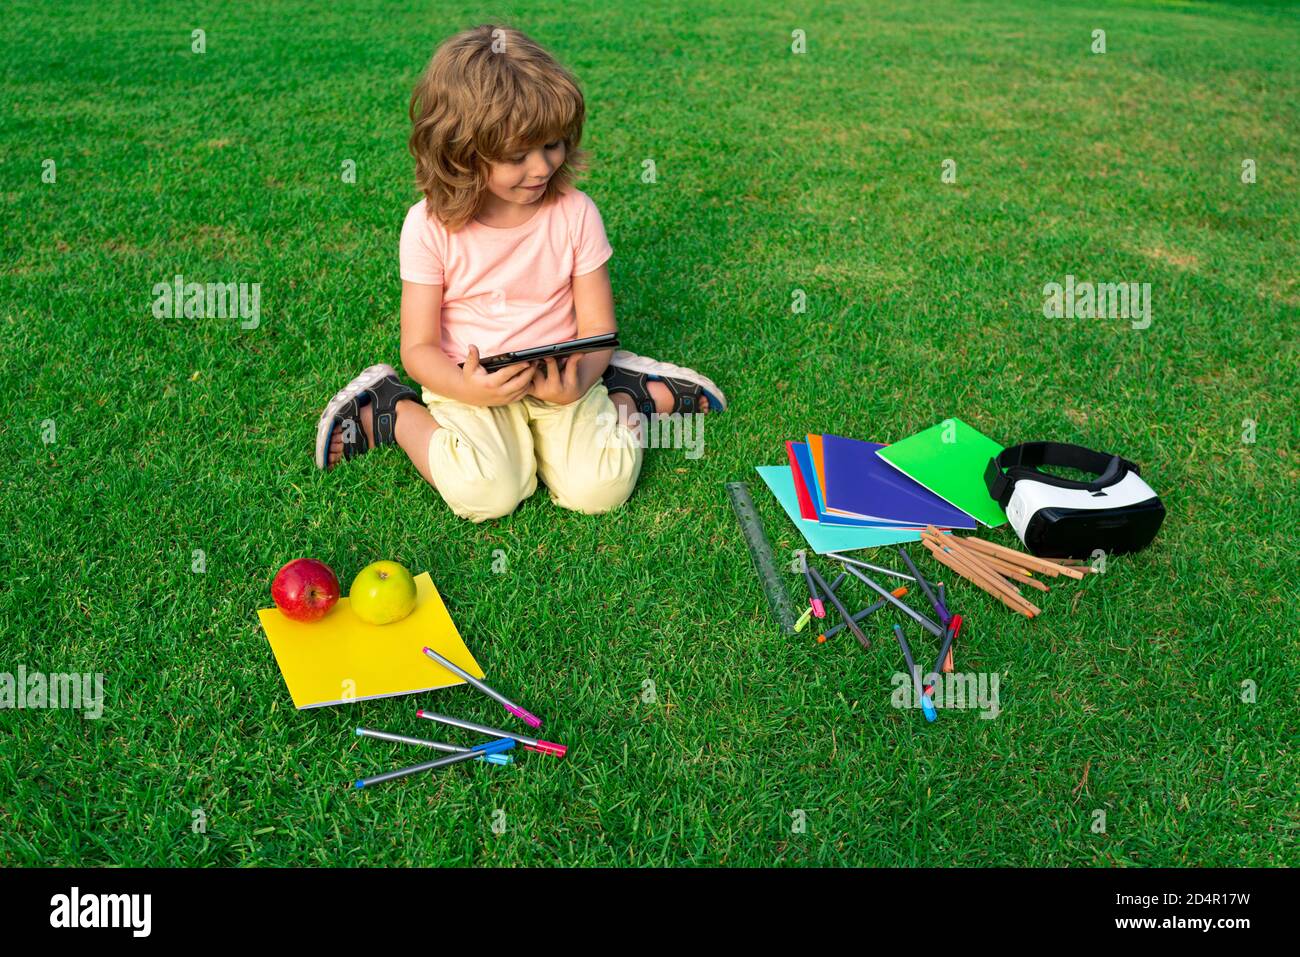 Elementary school students boy doing homework outdoor. Child reading tablet. Kids education, learning and studying. Stock Photo